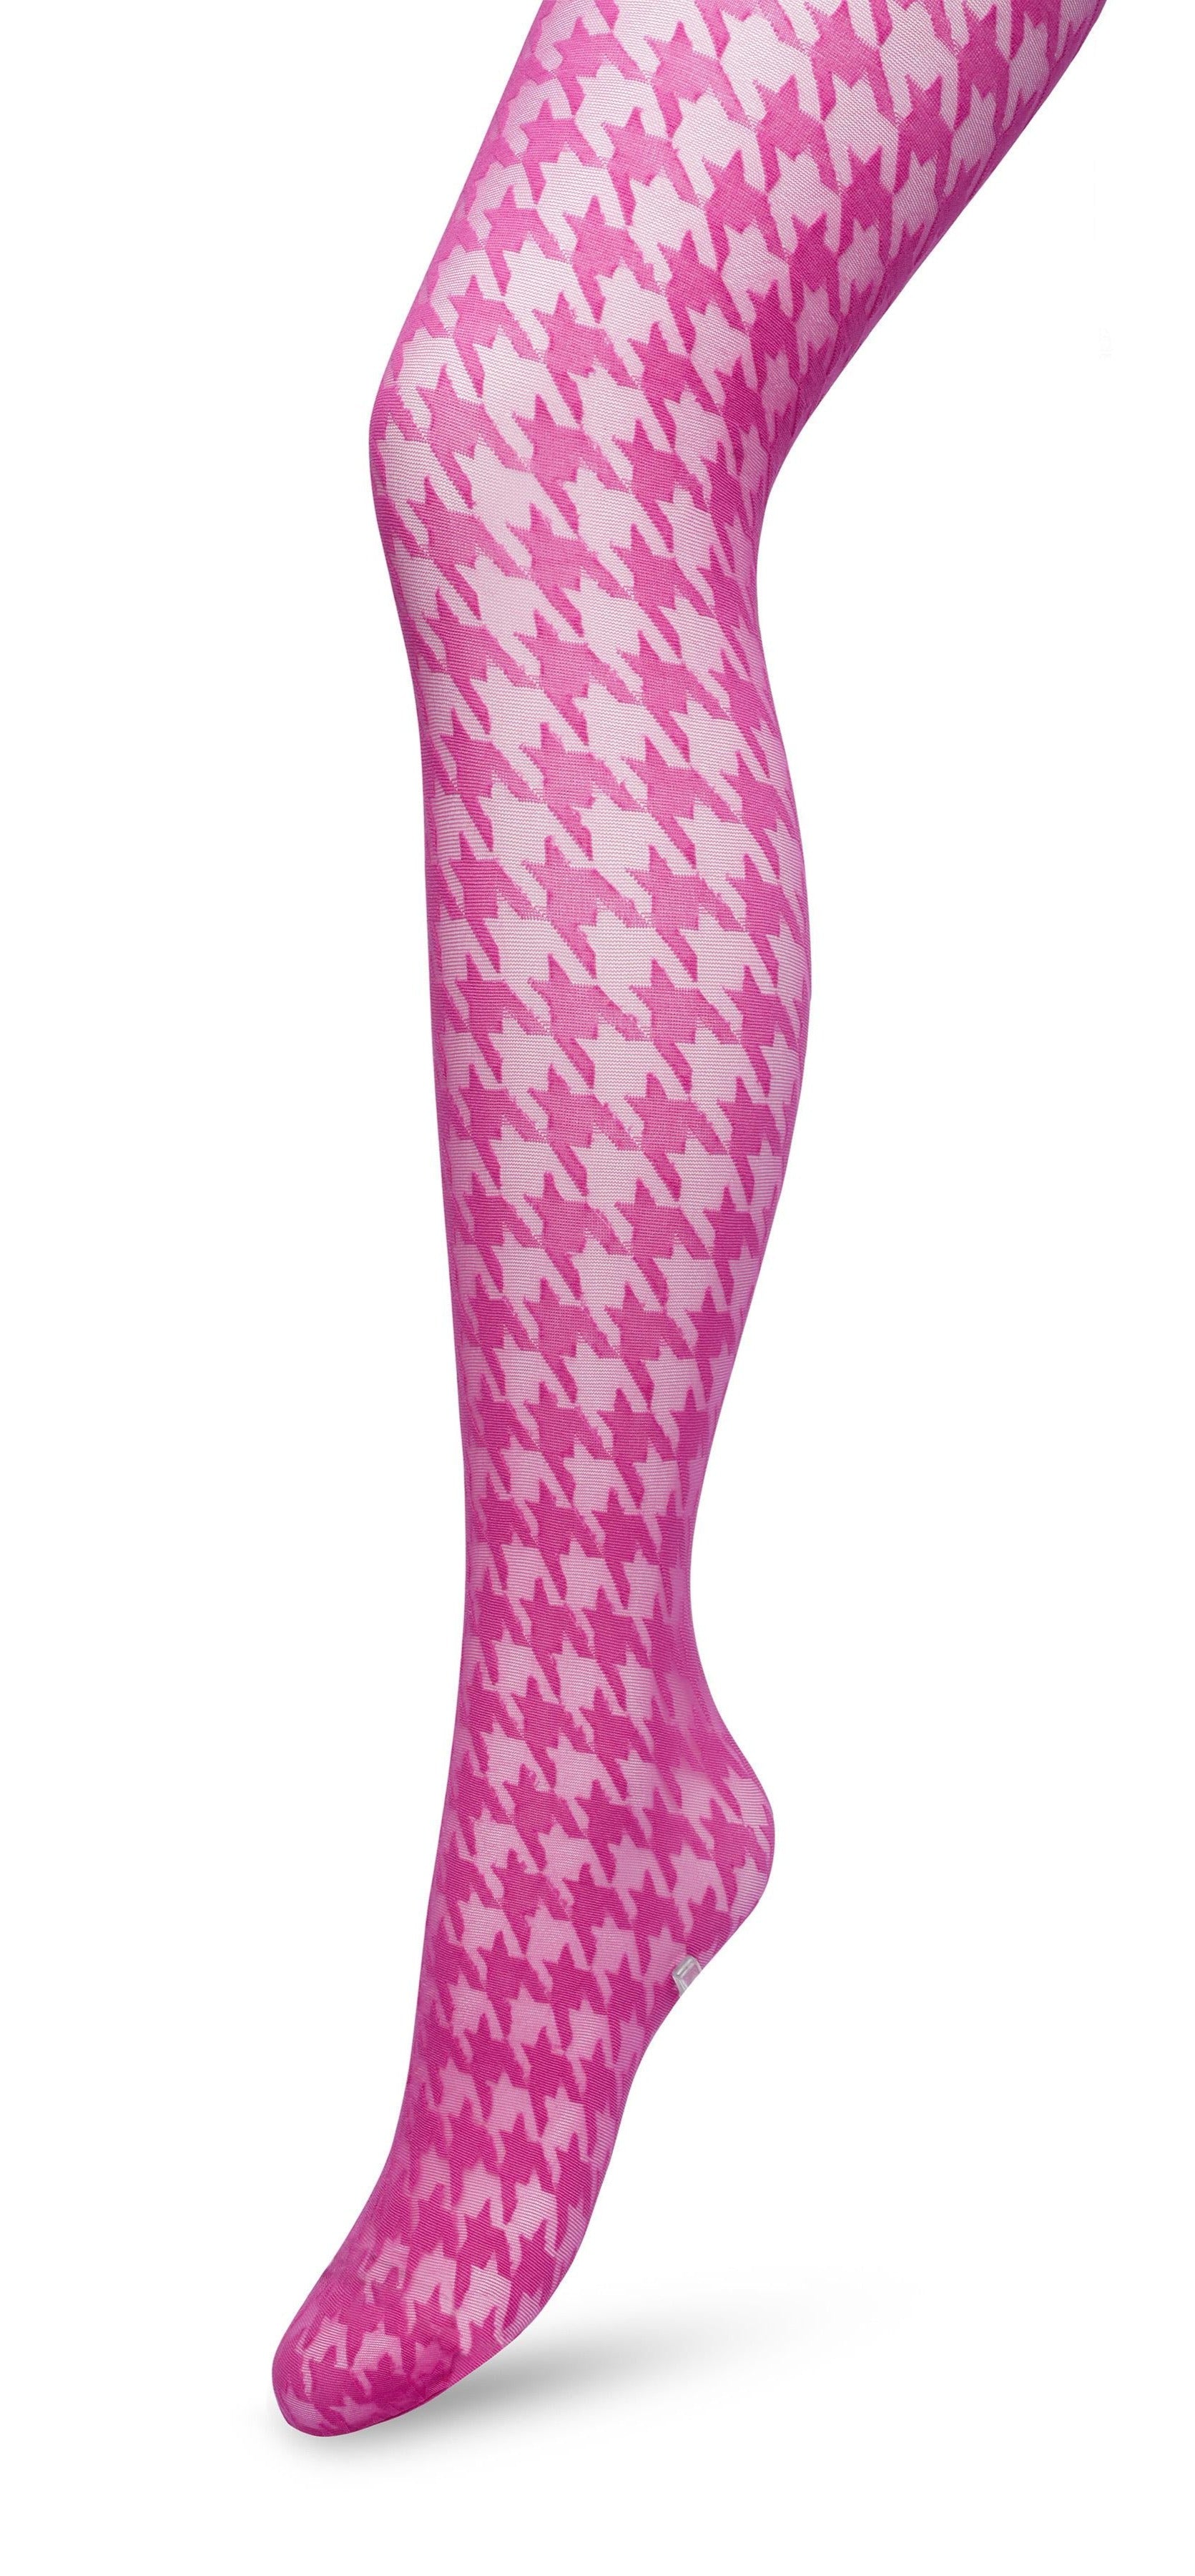 Bonnie Doon BP221903 Houndstooth Tights - Sheer fashion tights with a woven opaque dogtooth pattern in bright pink.